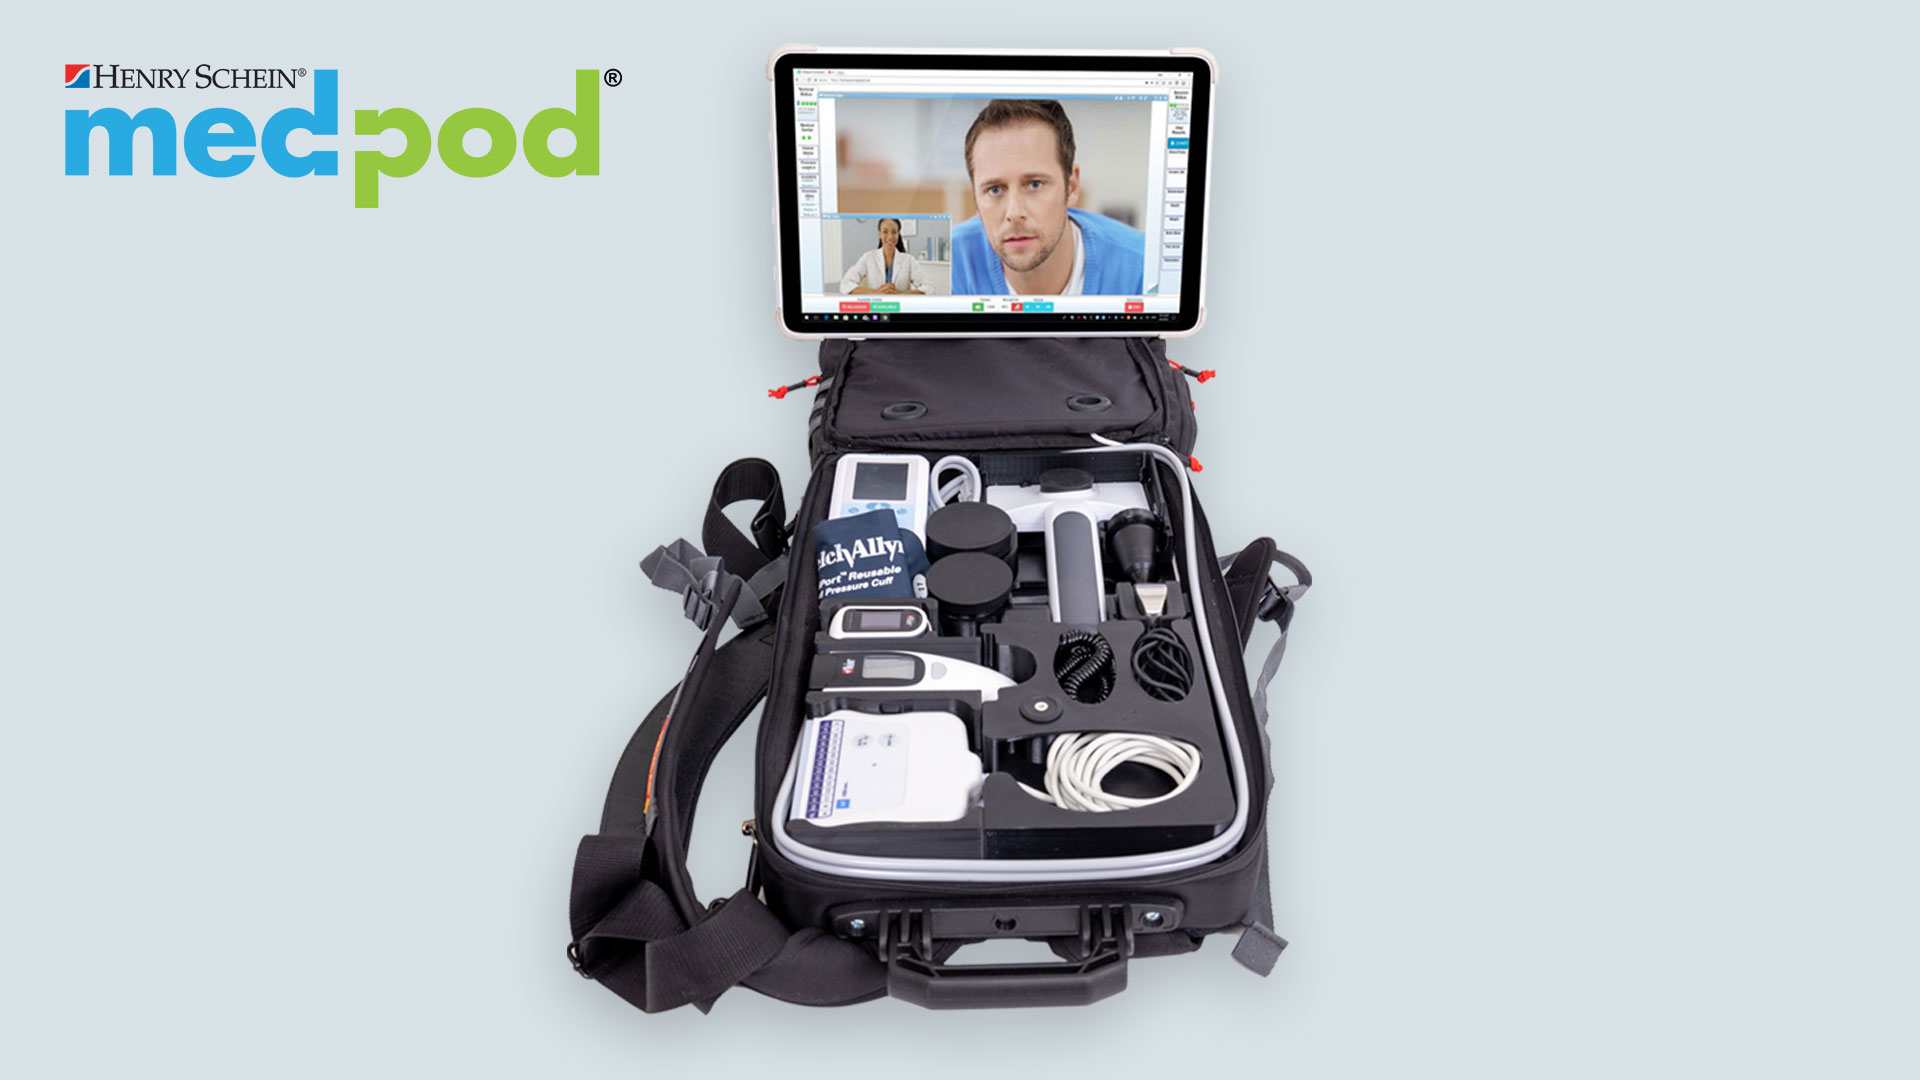 Henry Schein Medical & Medpod Launches Portable Telediagnostic Solution